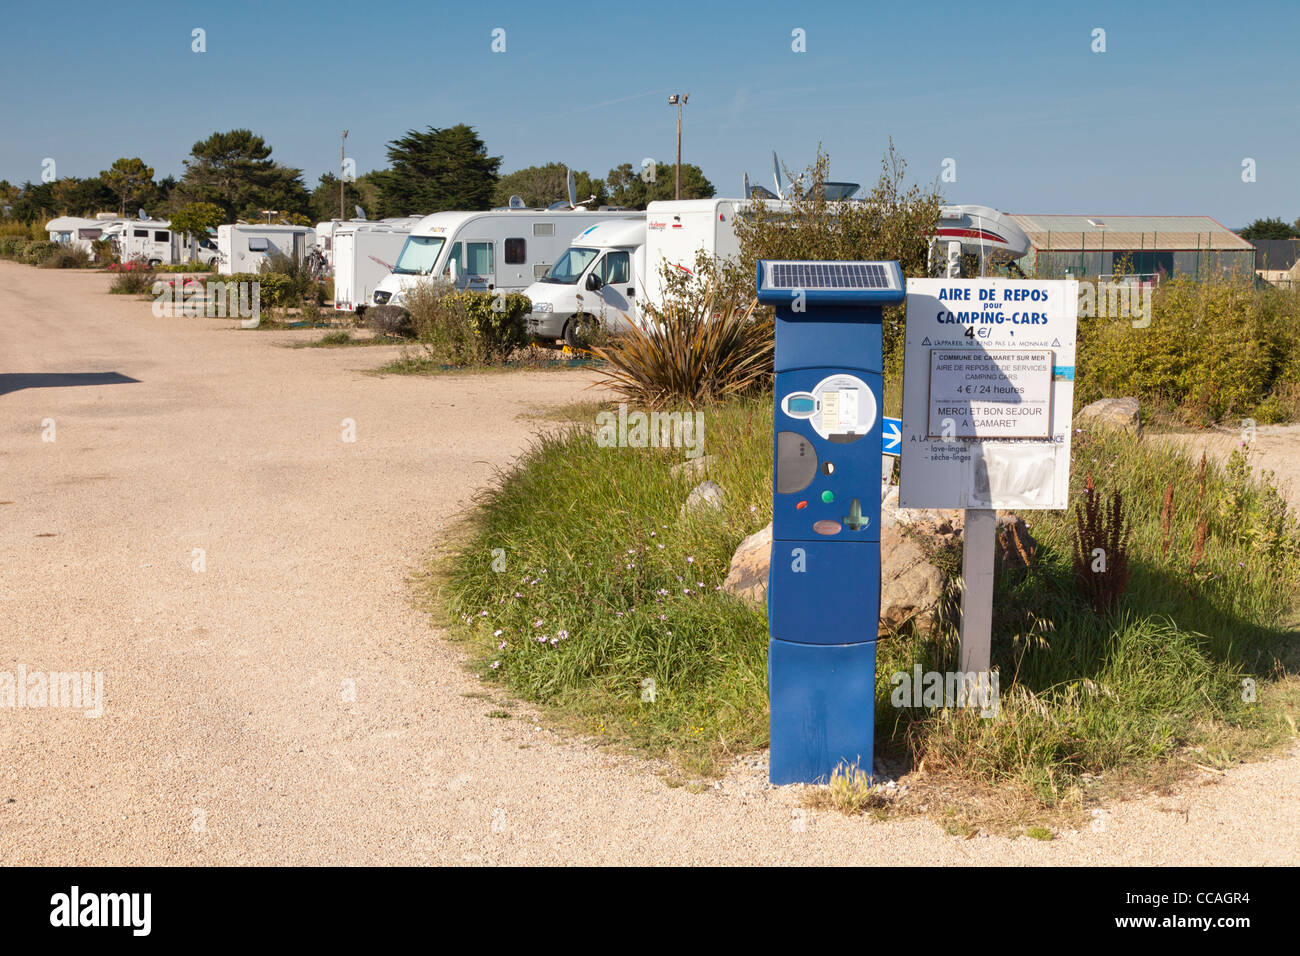 Stopping place for campervans and motorhomes at Camaret-sur-Mer, Brittany, France. Stock Photo